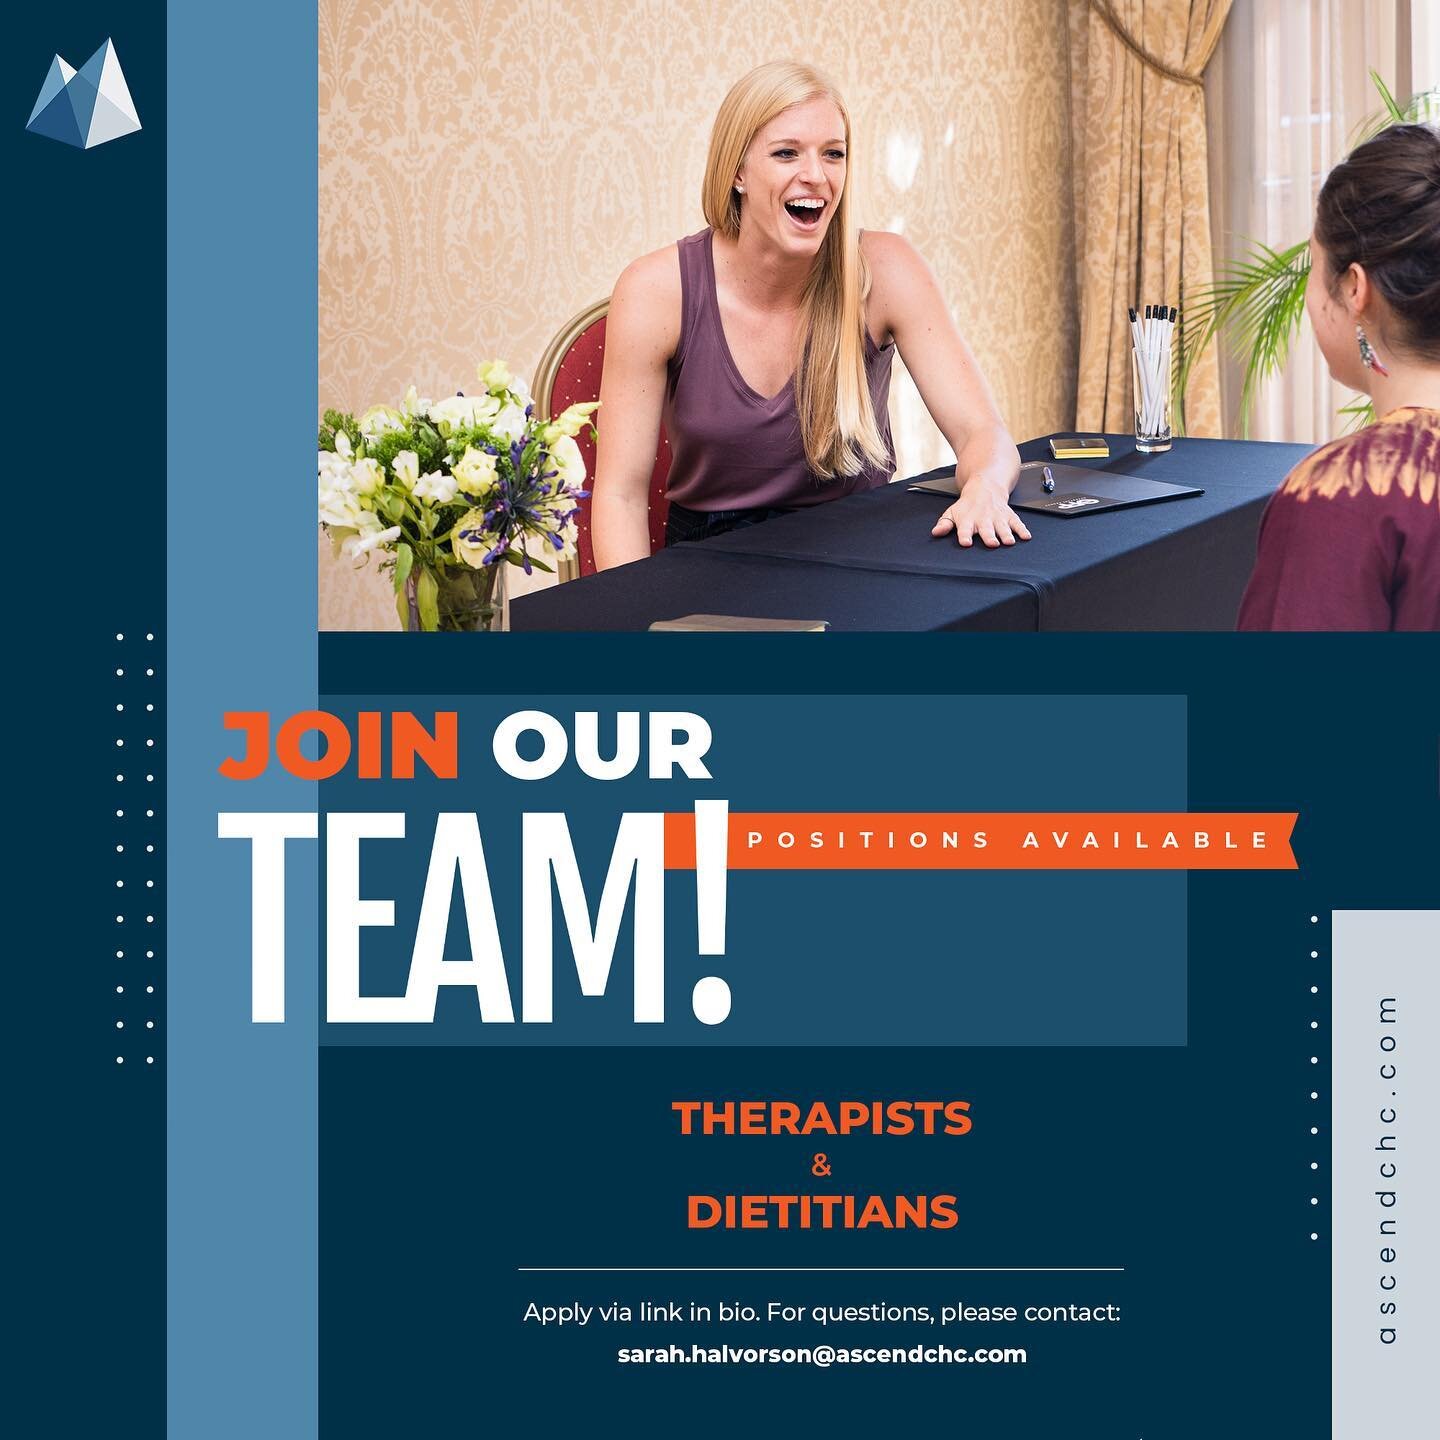 Ascend is Hiring! Therapist &amp; dietitian positions are available in our Champaign, Chicago, Northbrook, and telehealth/remote locations. LINK IN BIO to apply. 

Therapist: https://www.indeed.com/m/viewjob?jk=60da3c4f9cc7764d

Dietitian: https://ww